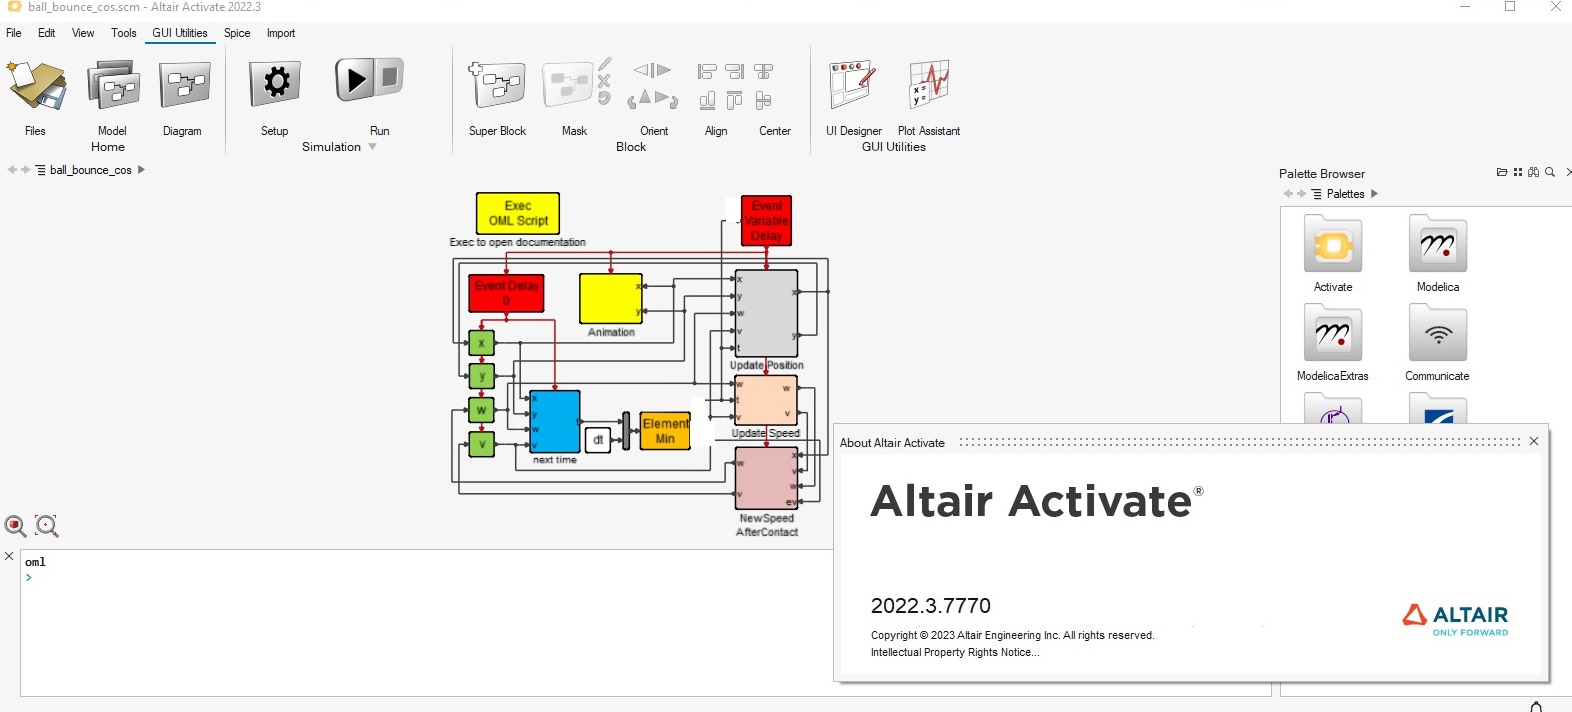 Working with Altair Activate 2022.3.0 full license